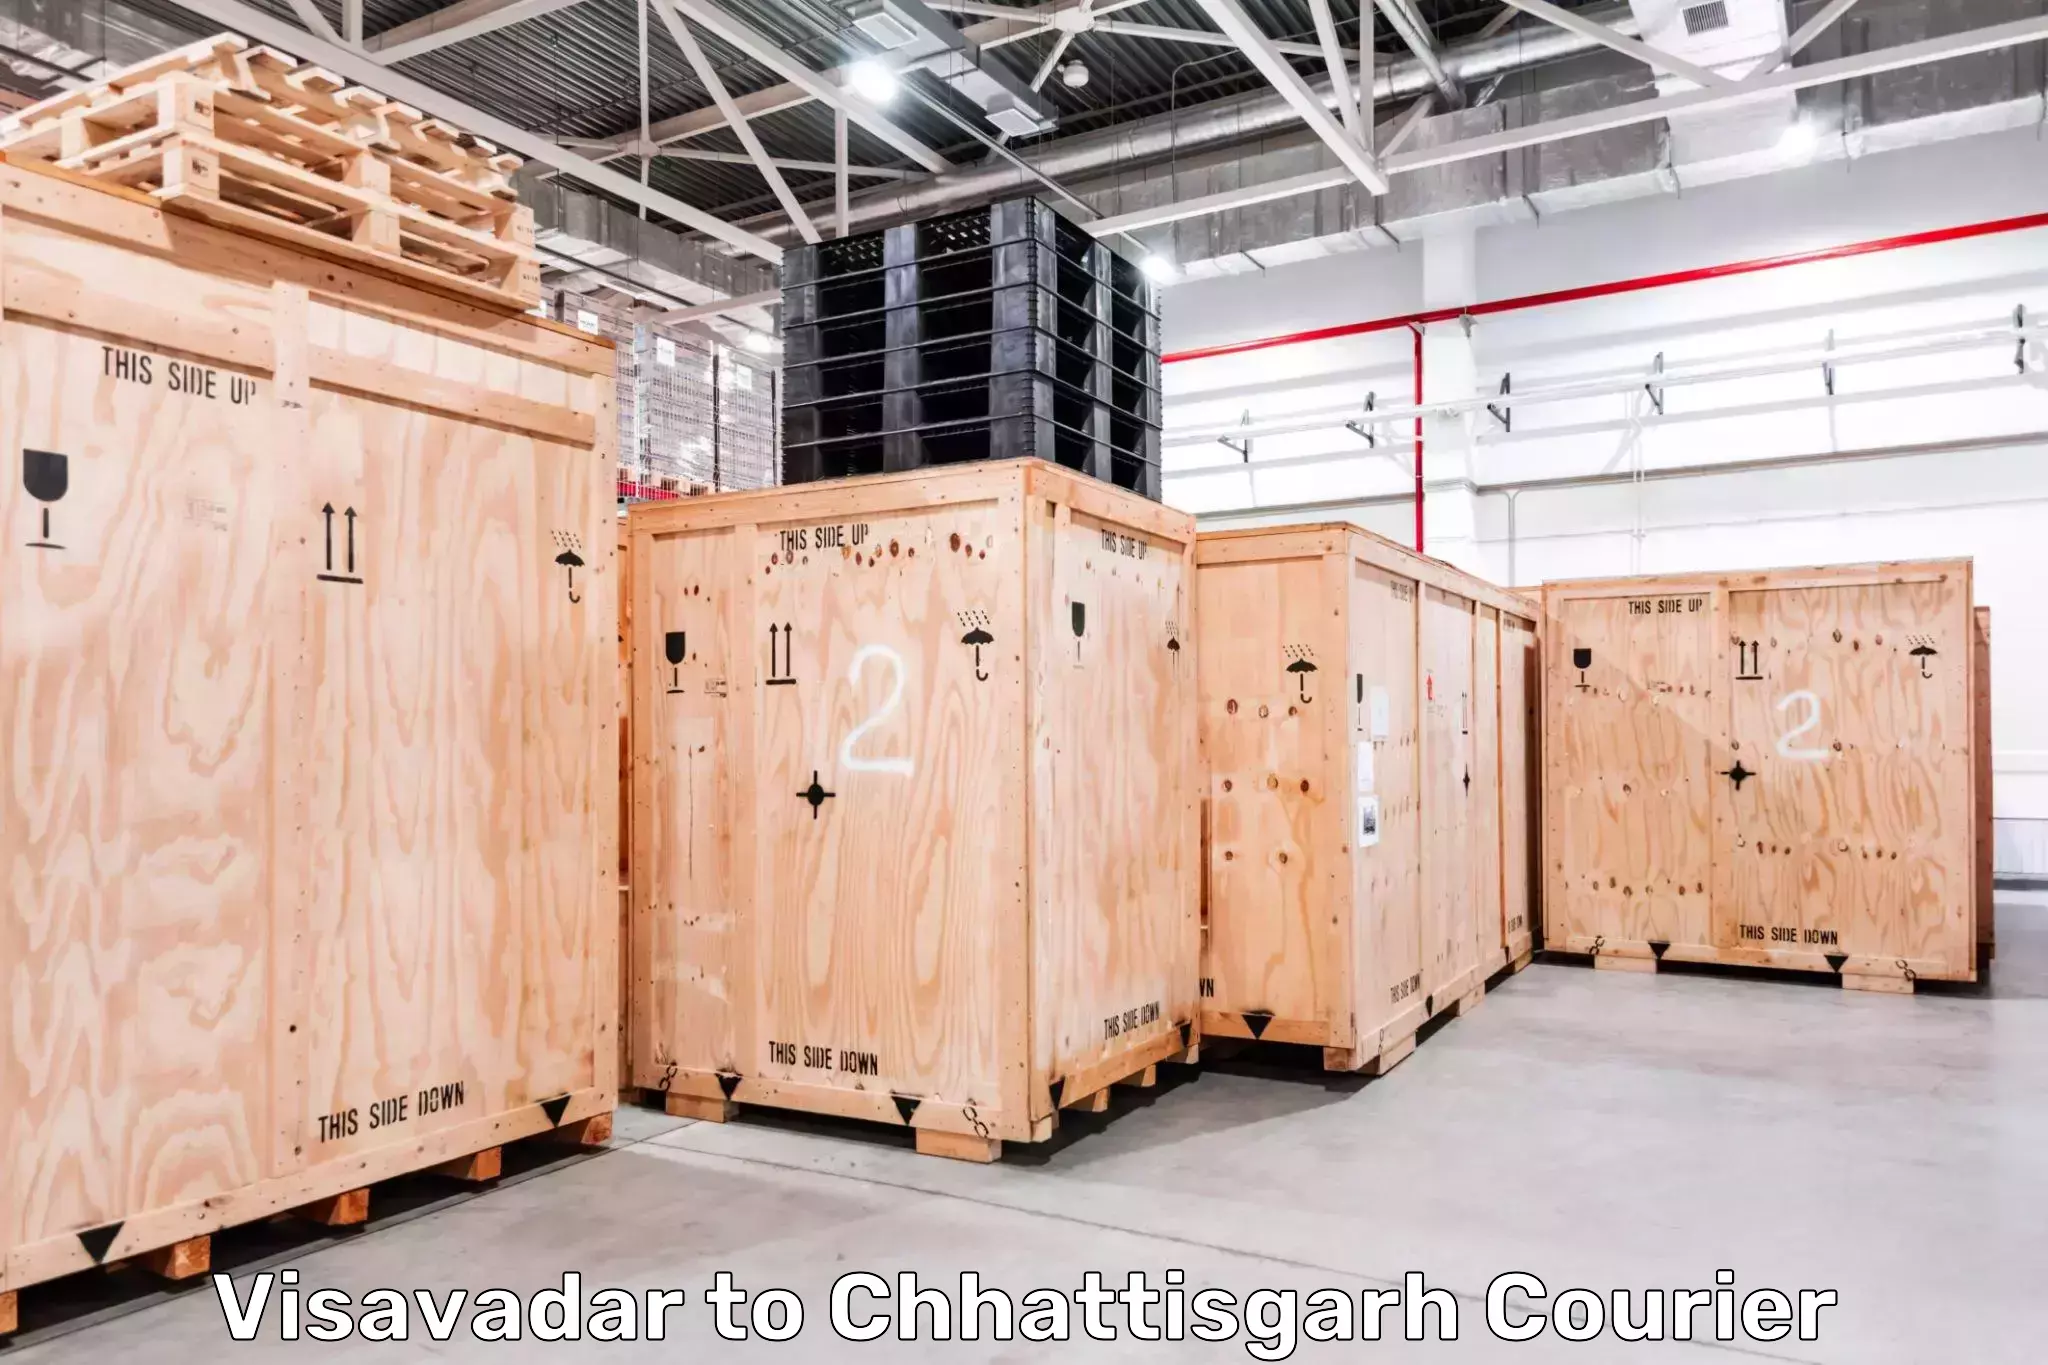 State-of-the-art courier technology Visavadar to Raigarh